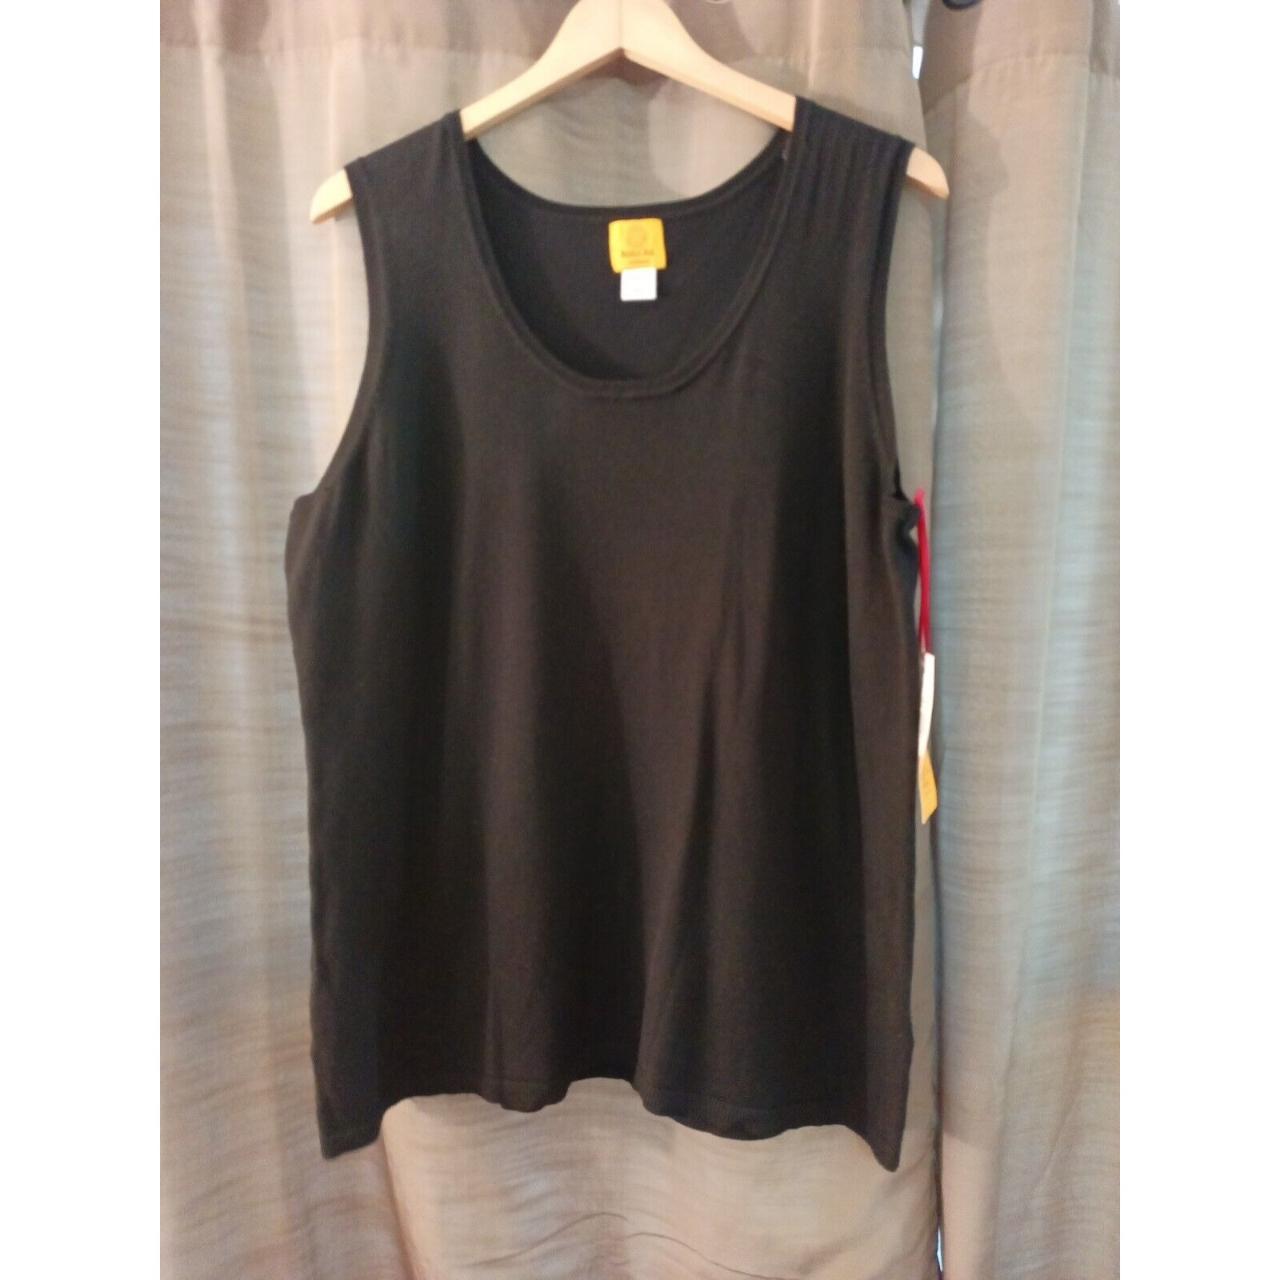 New with tags Women's Ruby Rd. Black Stretchy... - Depop